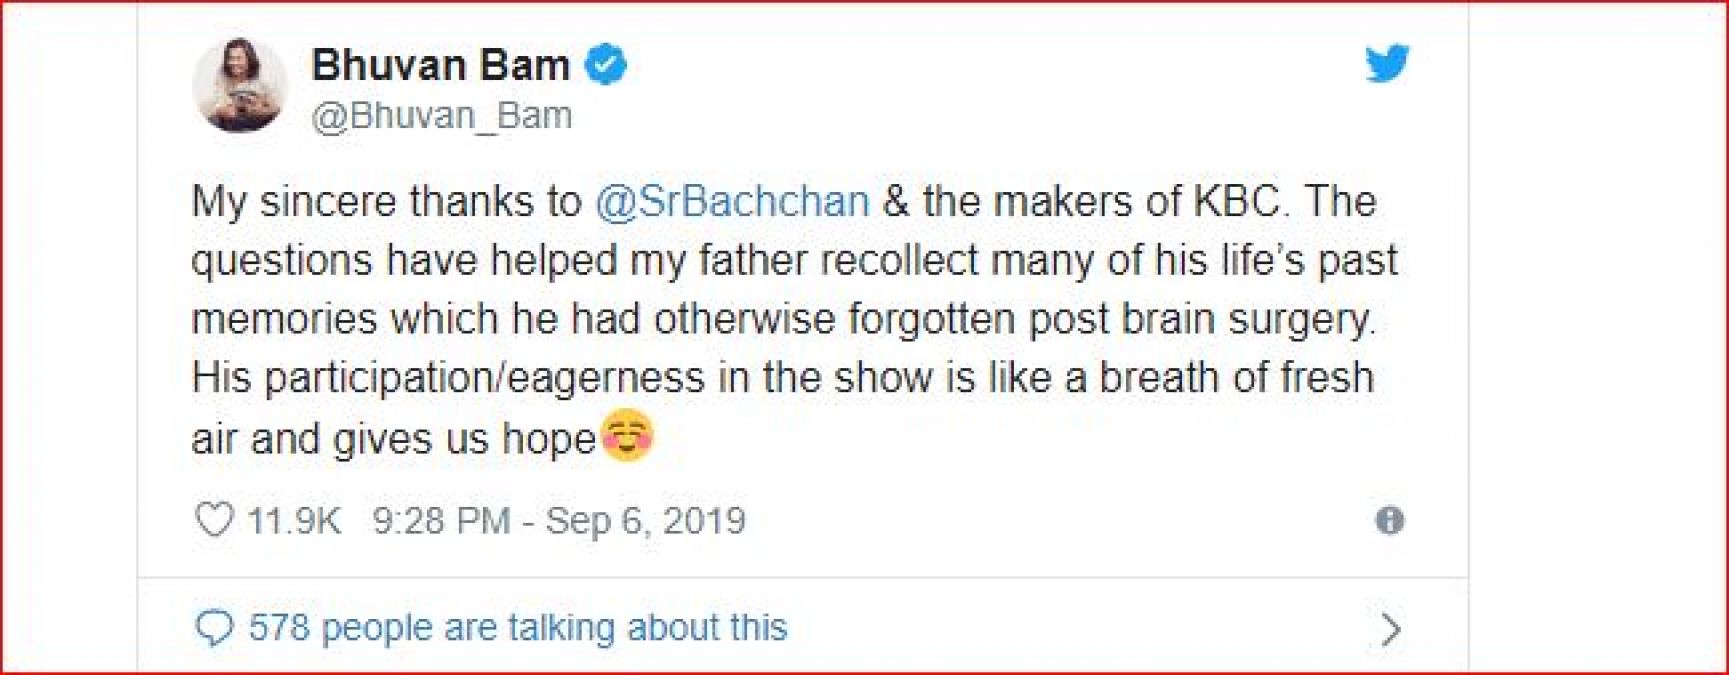 Bhuvan Bam thanks Amitabh Bachchan, says KBC questions help his dad recollect past memories